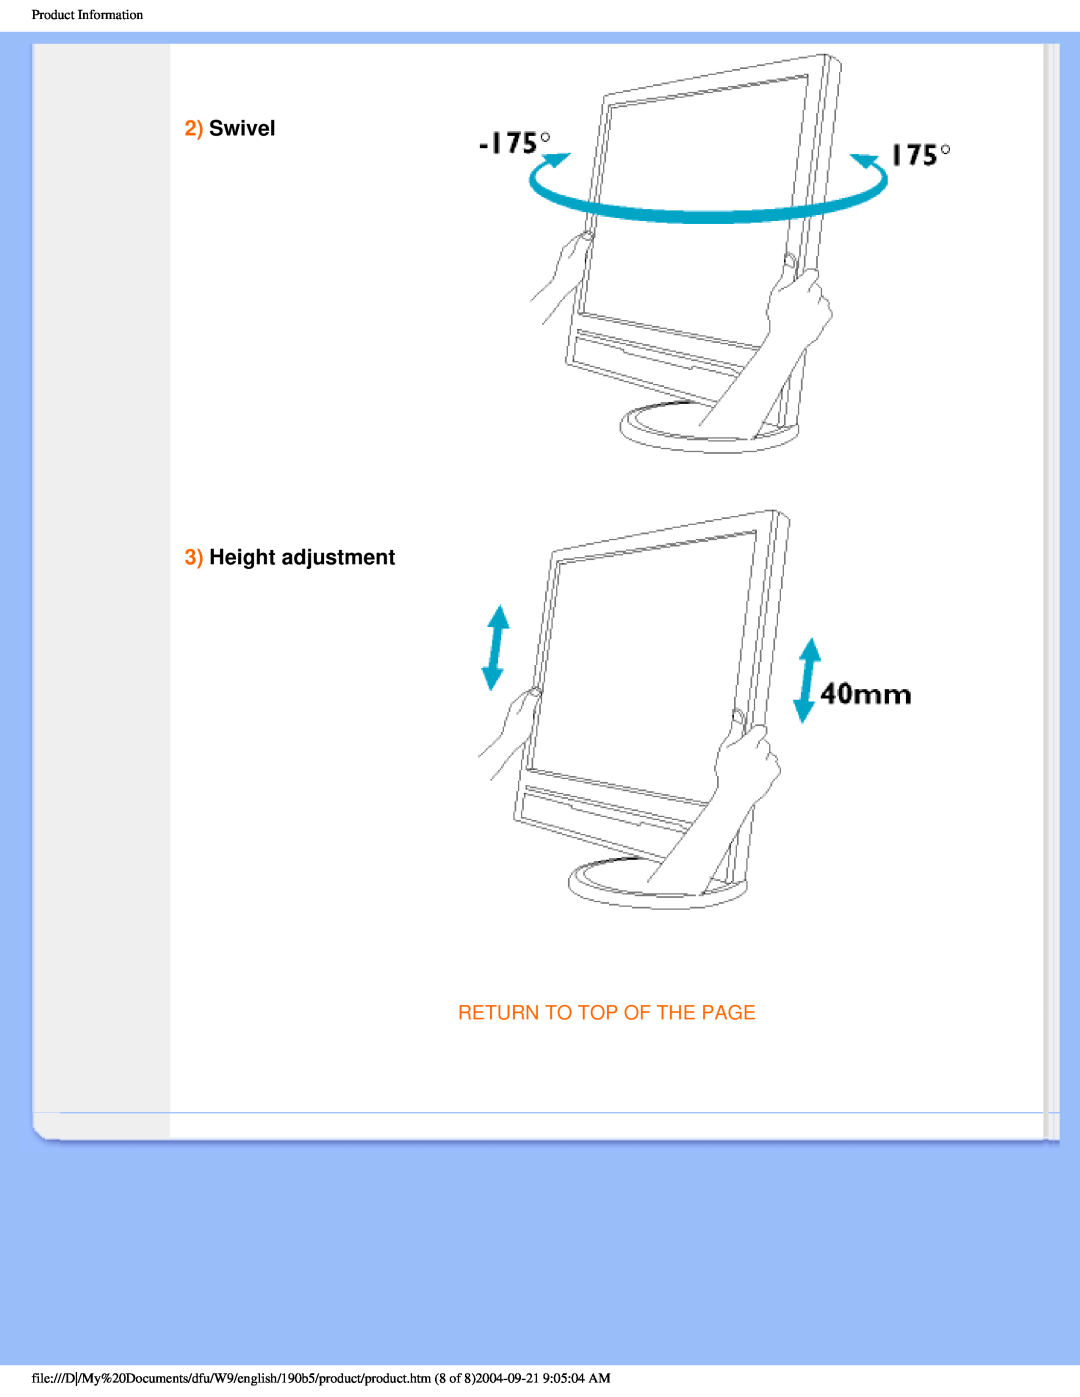 Philips 190b5 user manual Swivel 3 Height adjustment, Return To Top Of The Page, Product Information 